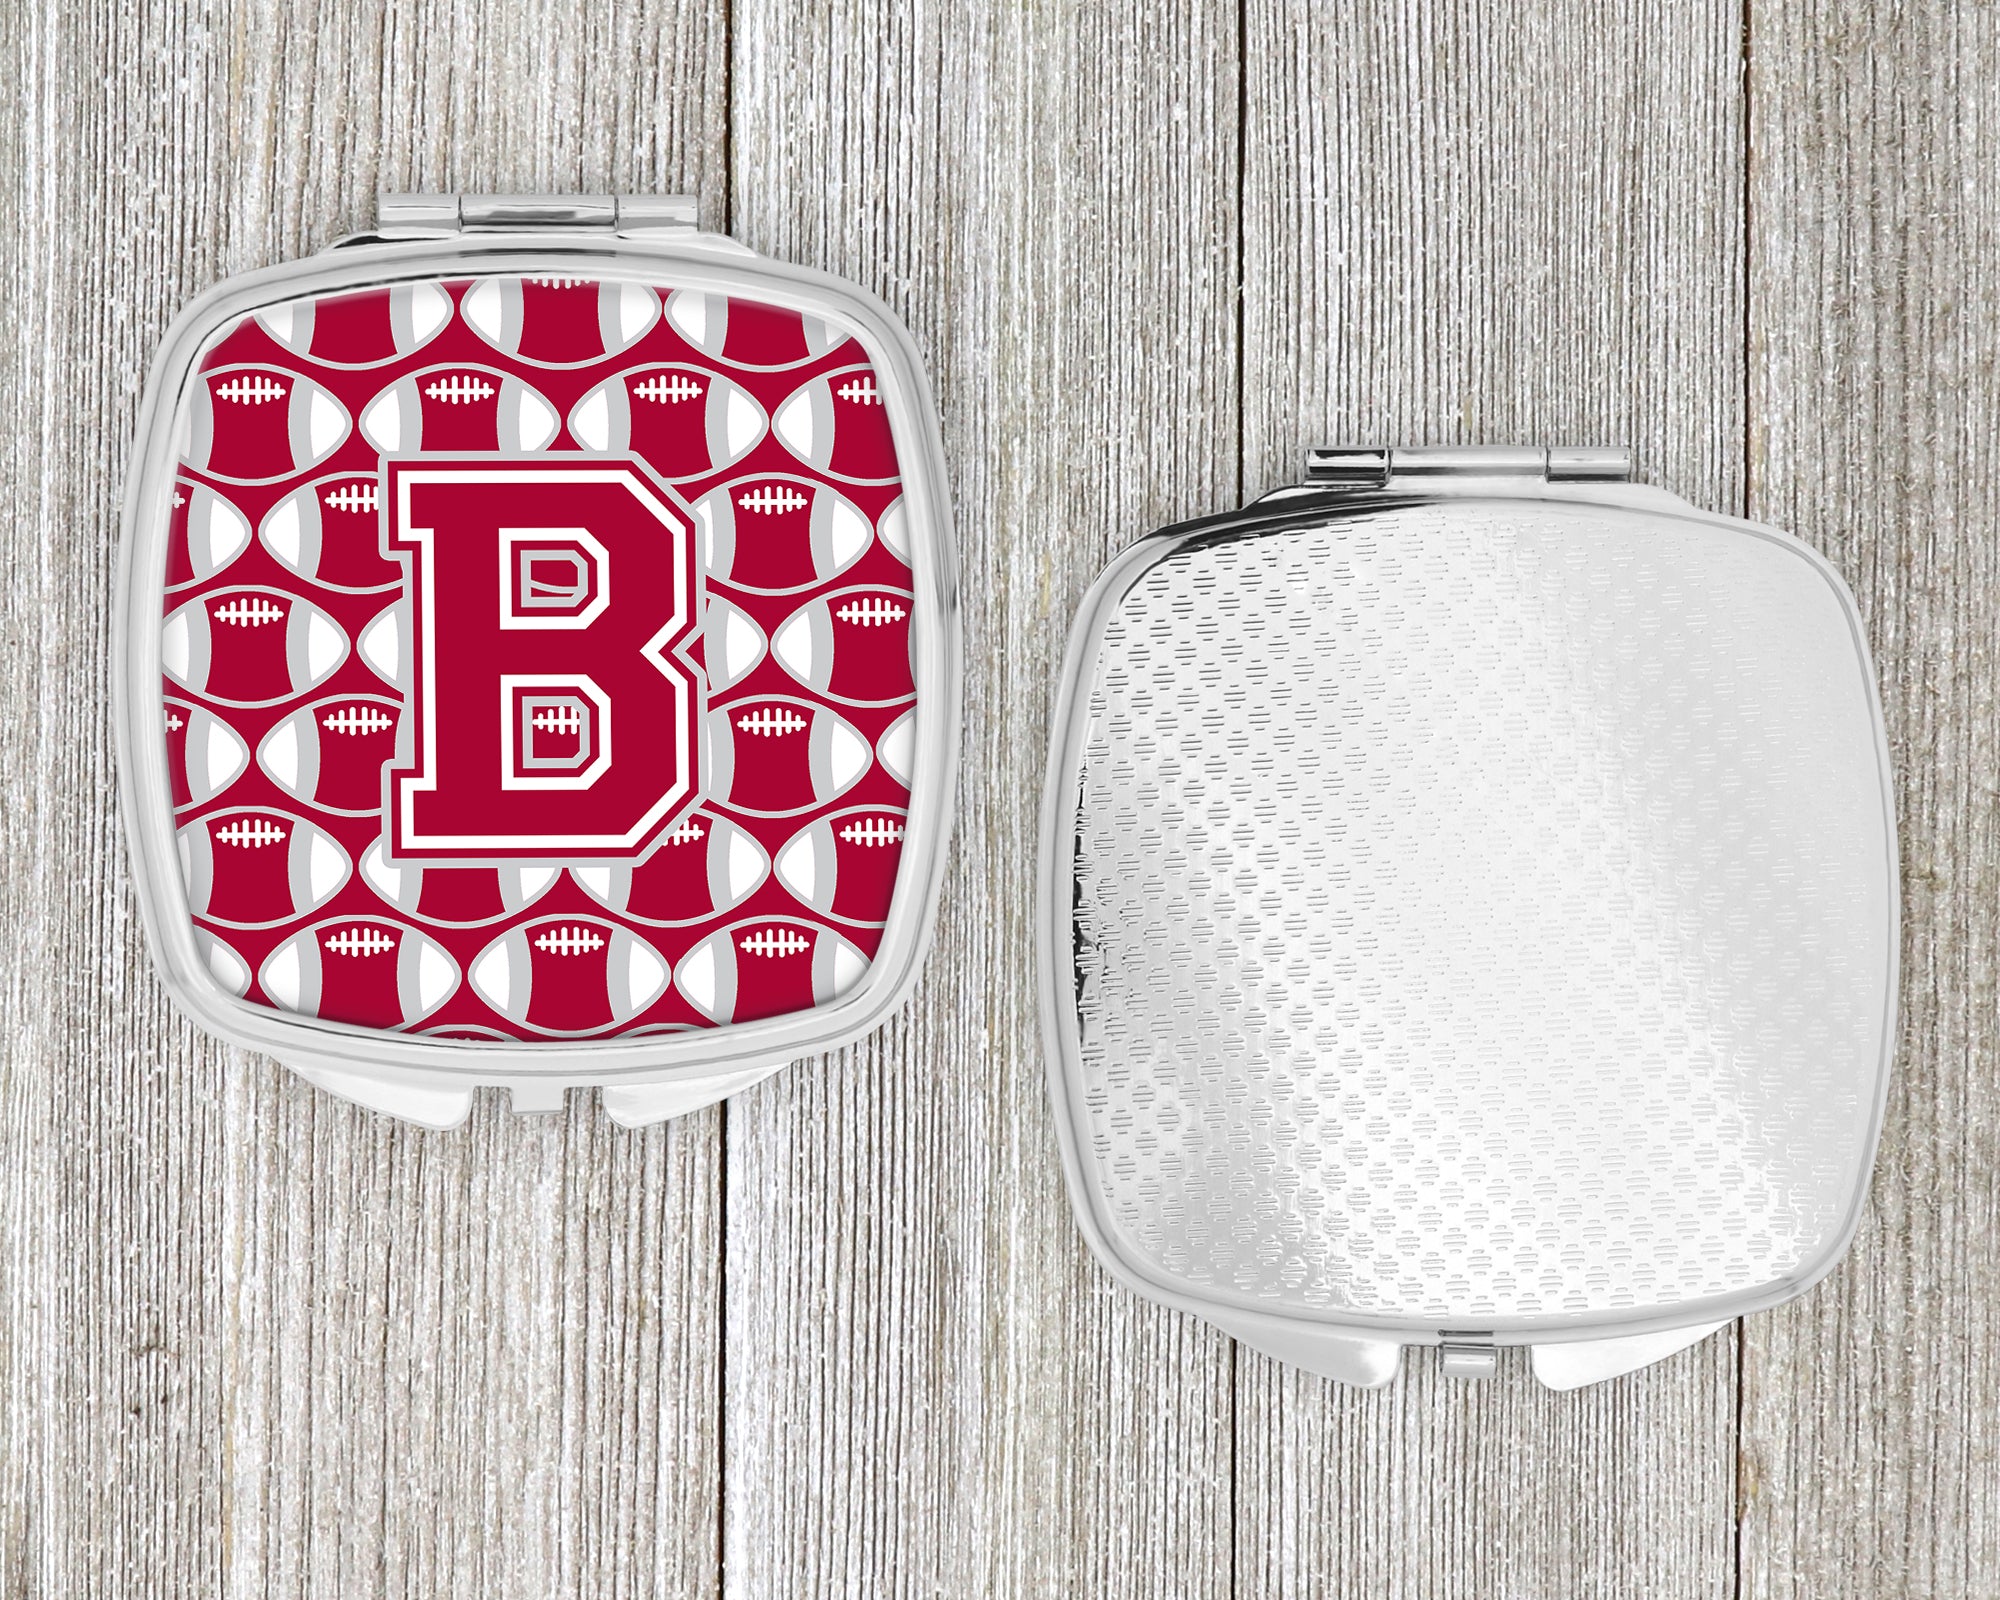 Letter B Football Crimson, grey and white Compact Mirror CJ1065-BSCM